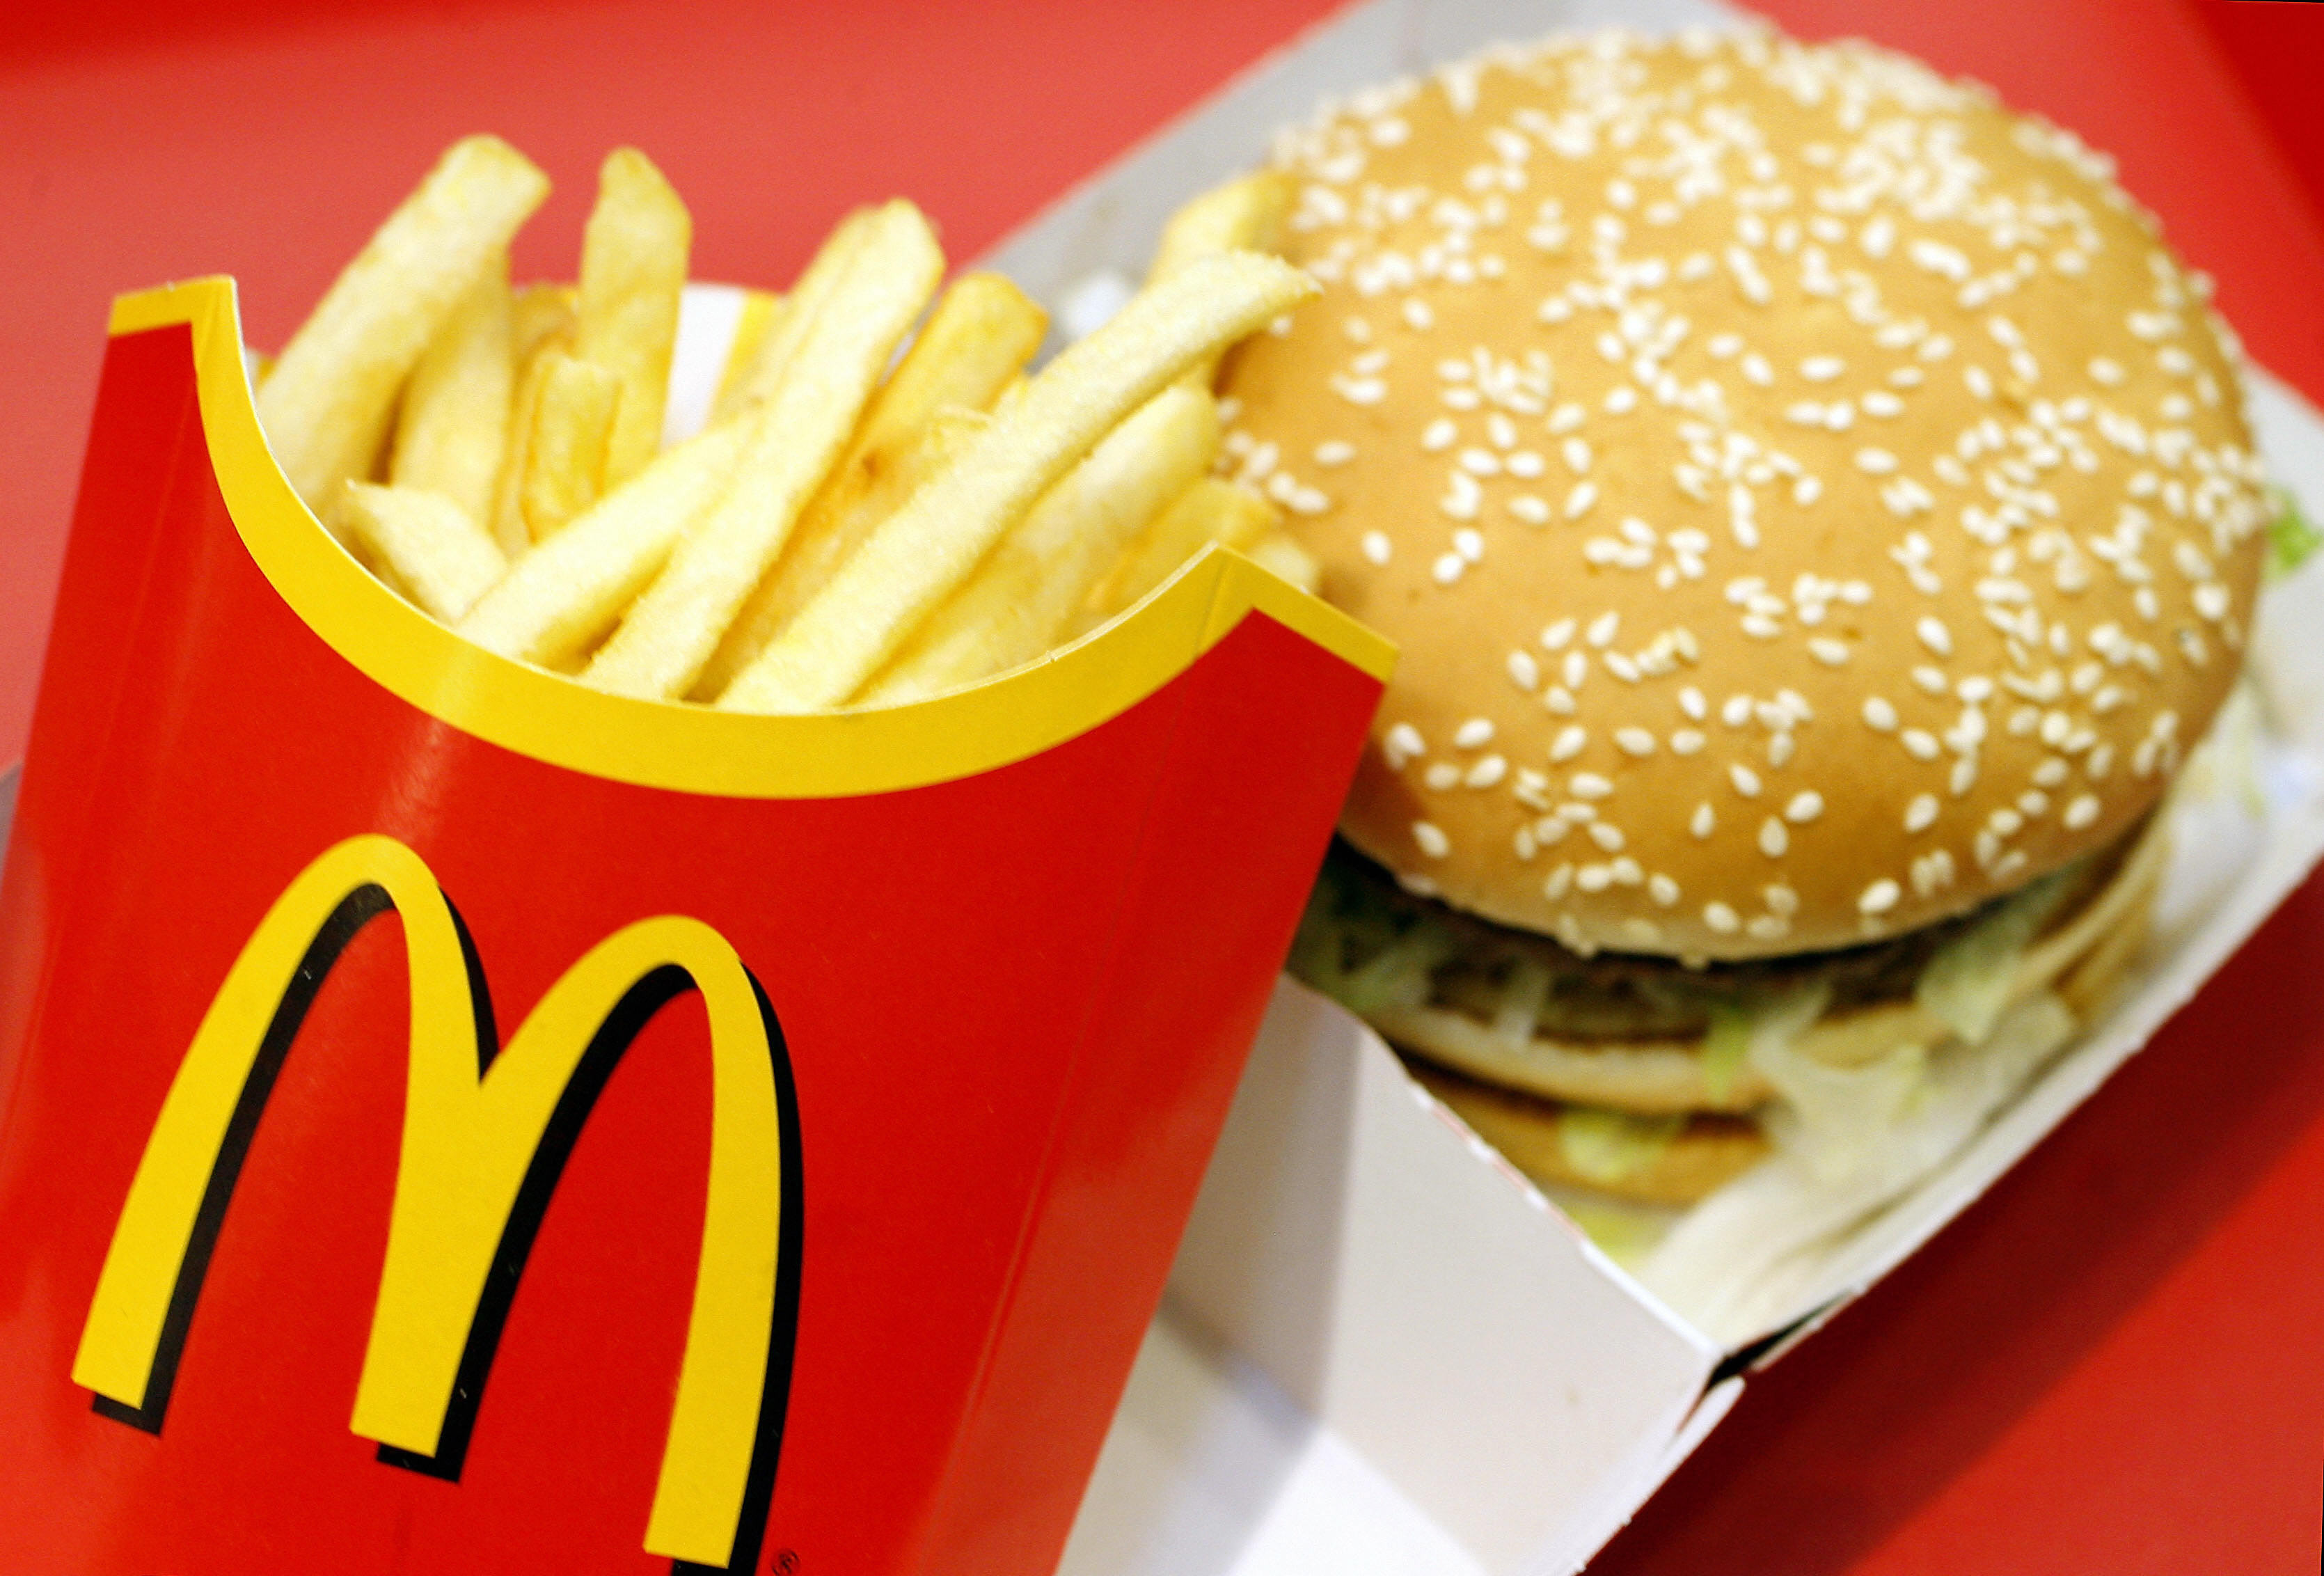 Maccies fans can take advantage of the 3 for £3 Mix 'N' Match deal